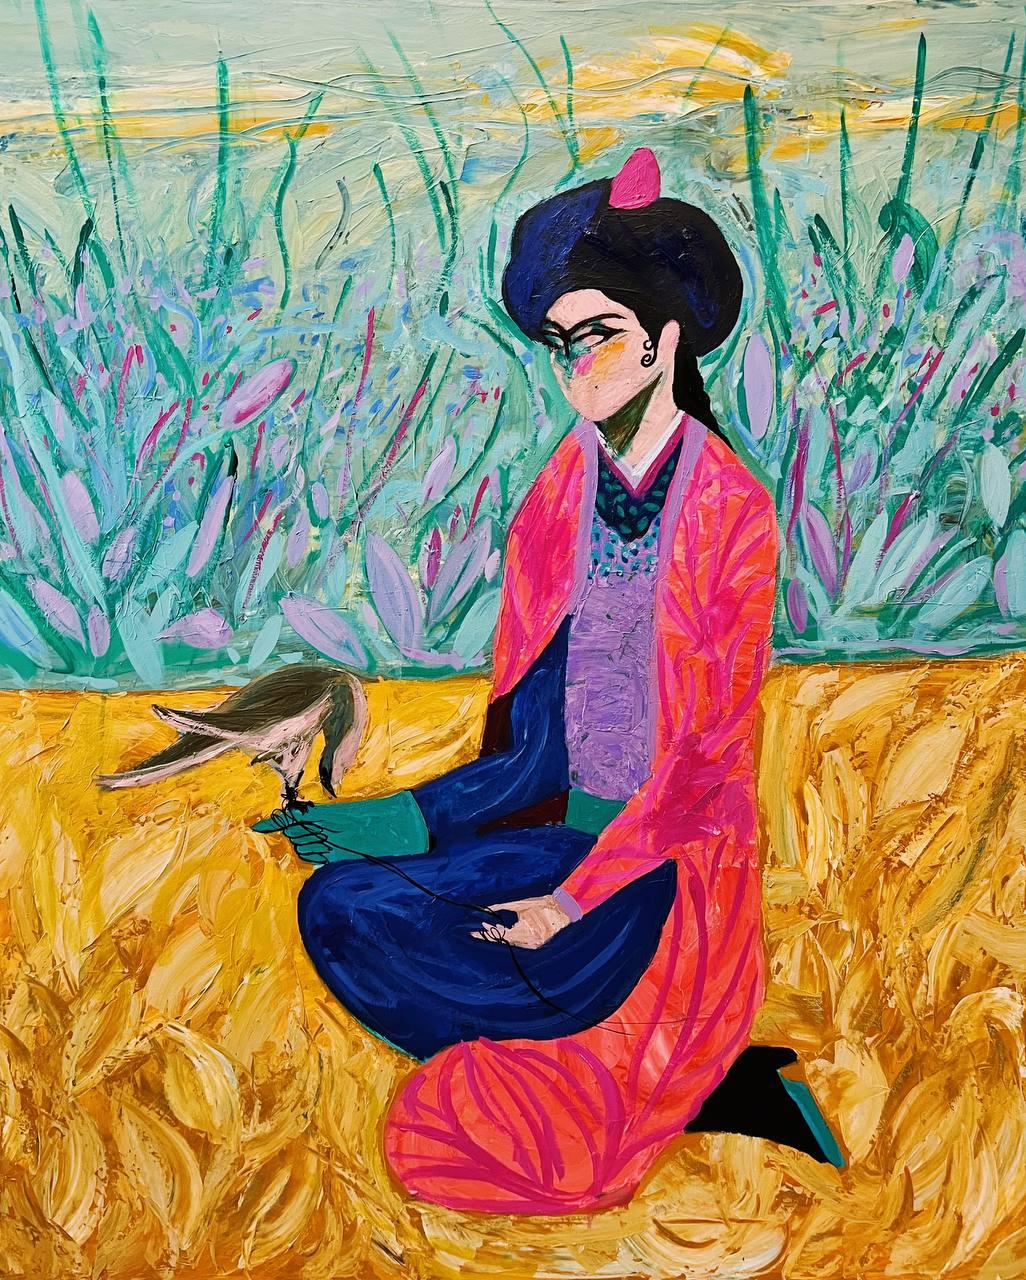 Majnun Figurative Painting - Your breath is in the air, 120x100cm